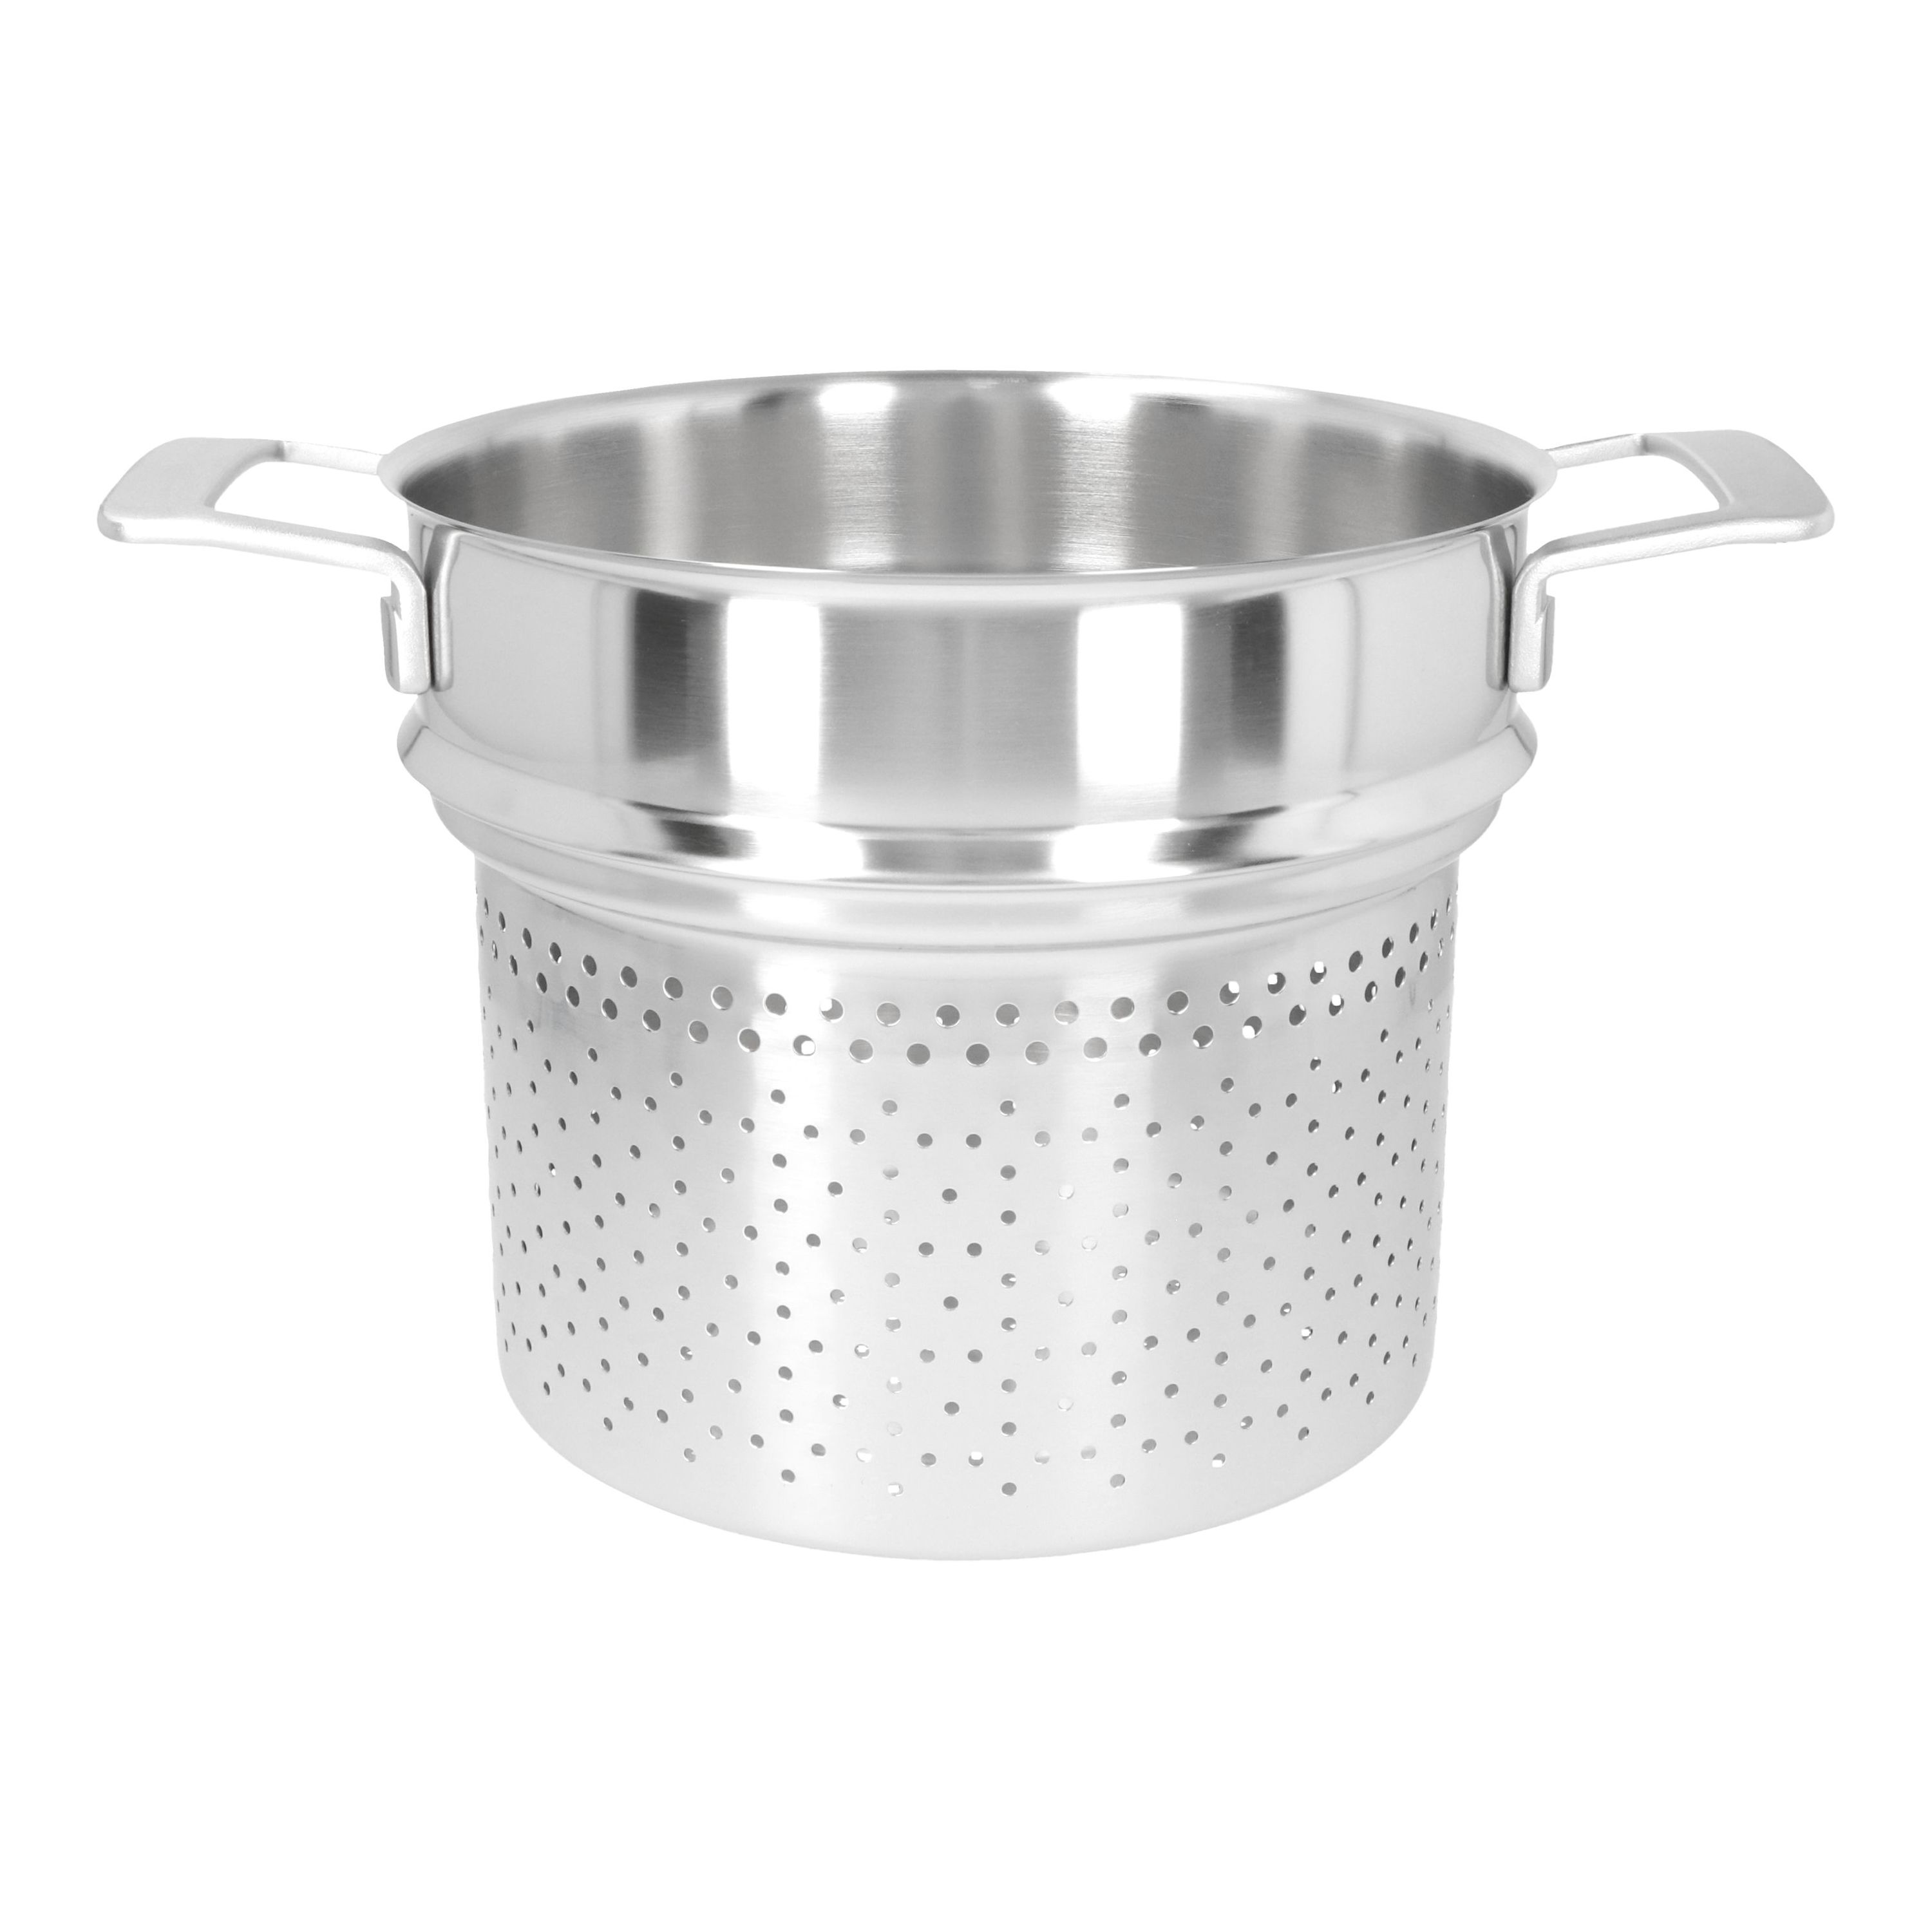 HENCKELS Pasta Pot with Lid and Strainers, 8.5-qt, Stainless Steel